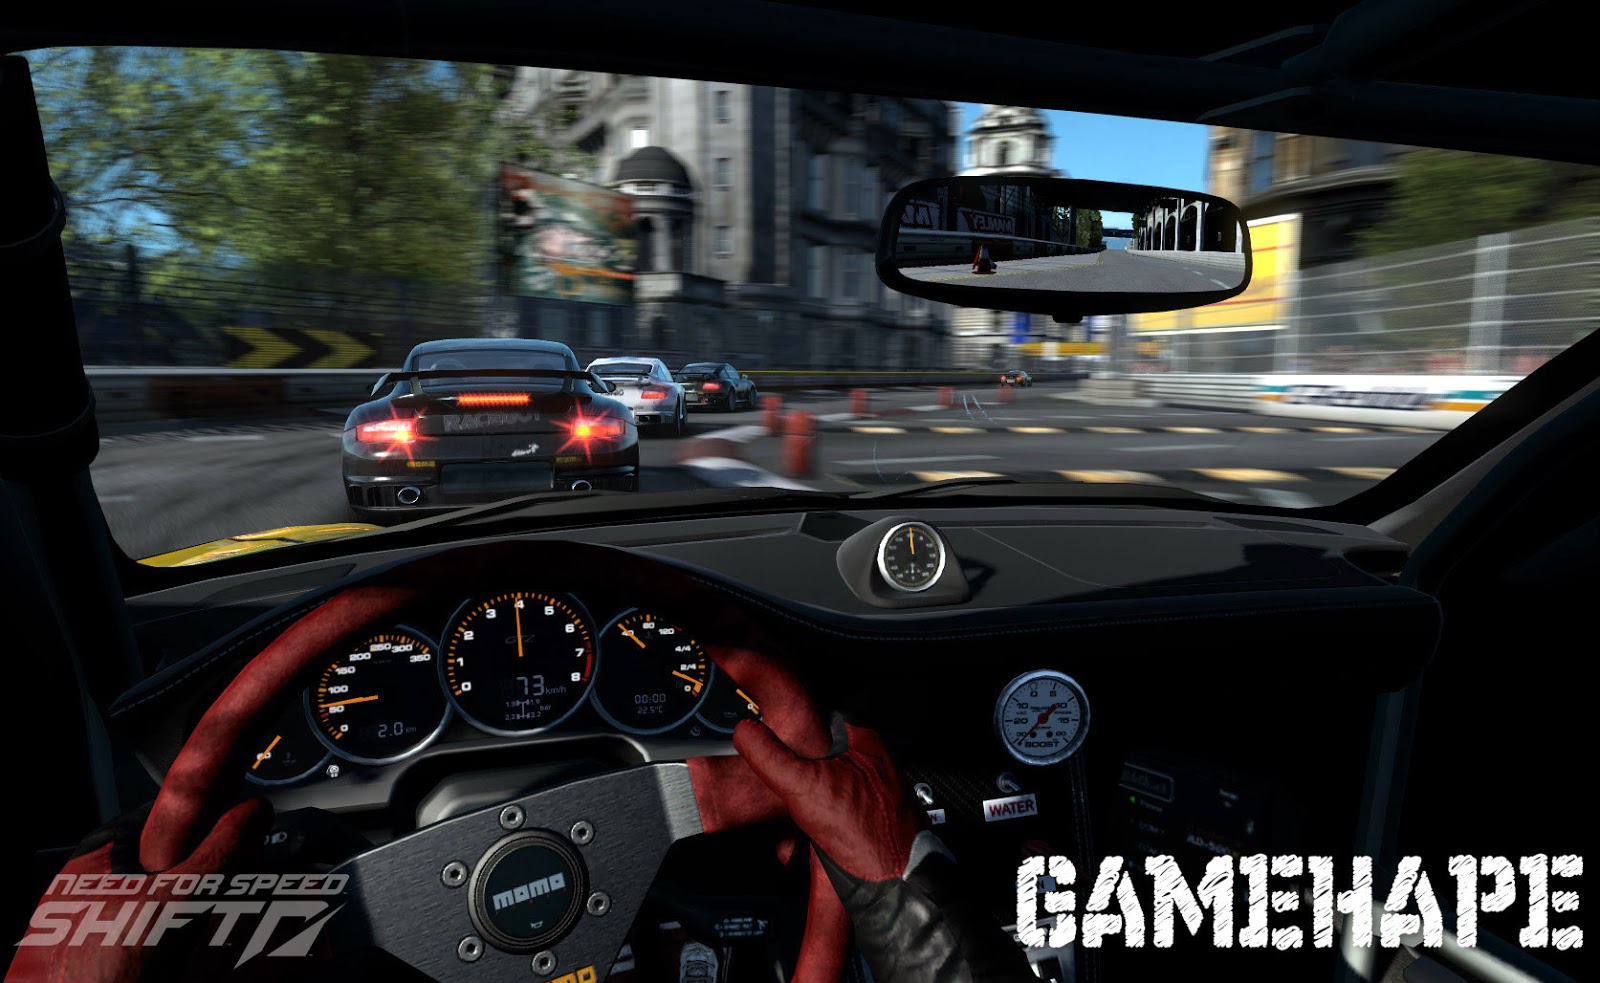 Nfs car race game free download pc